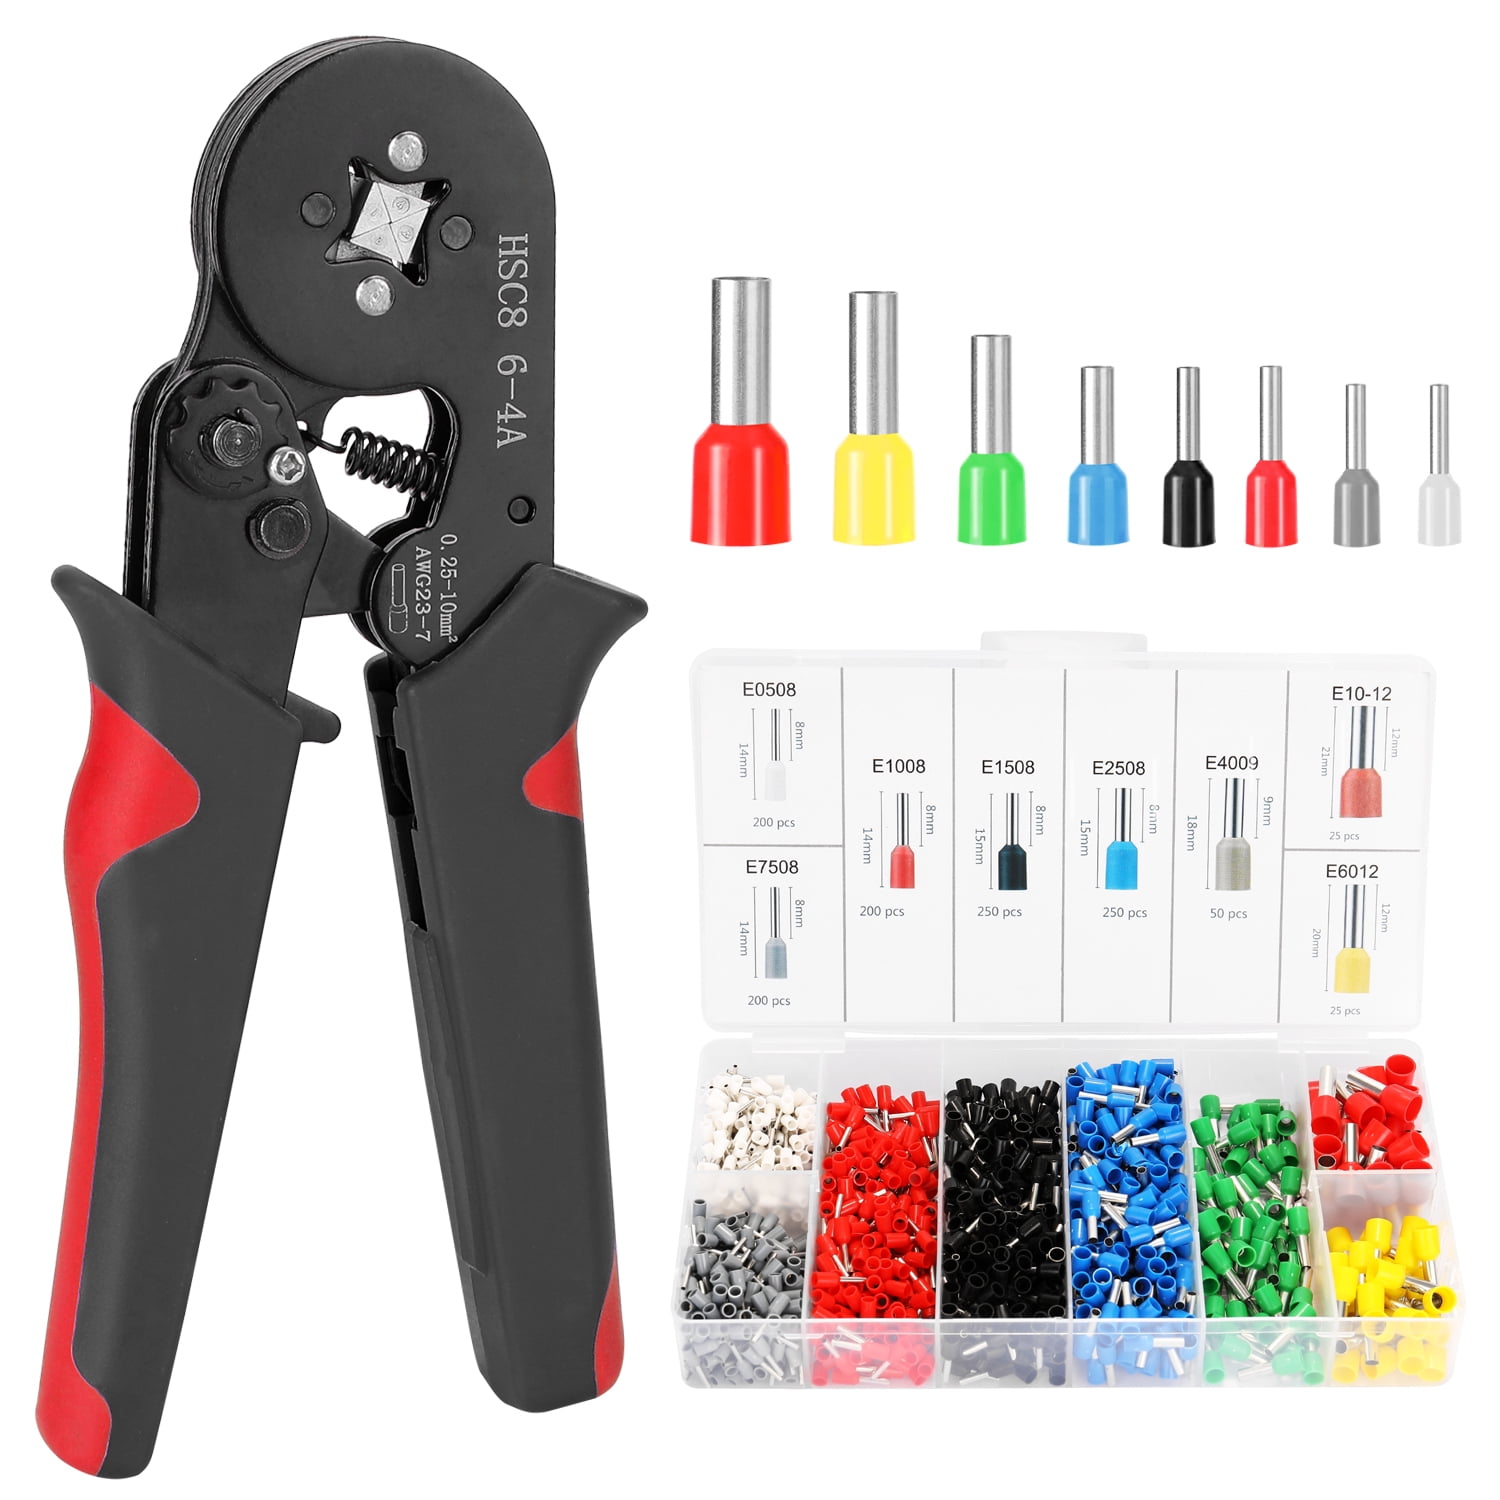 VLIKE Ferrule Crimper Pliers Set Wire Crimping Tool Kit with 1800 Terminal Conne 